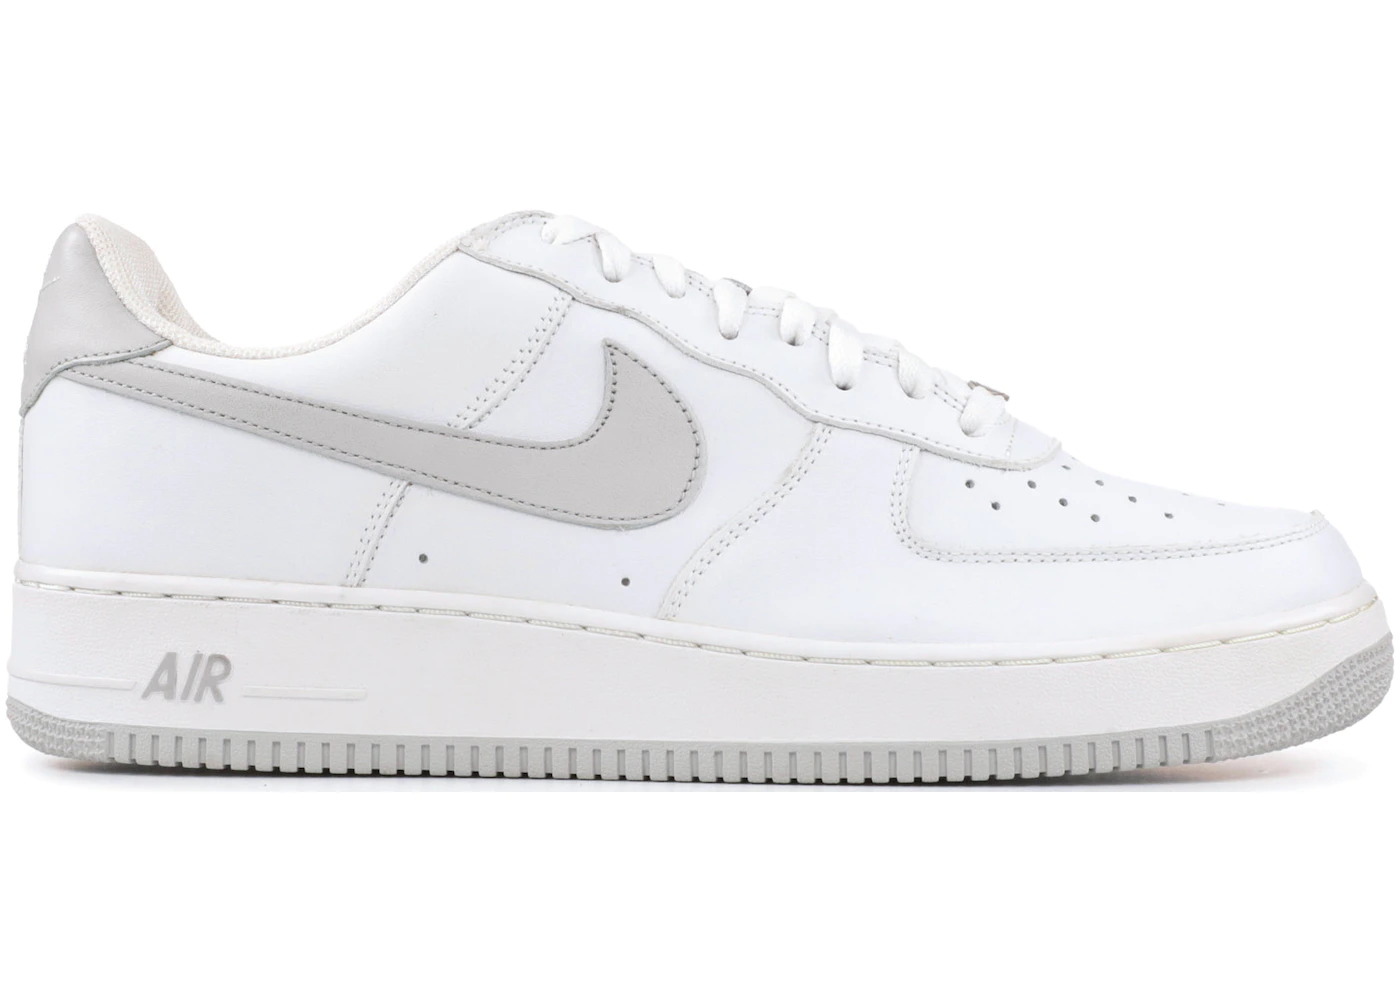 Nike Air Force 1 Low White Neutral Grey (2004) - 306353-101